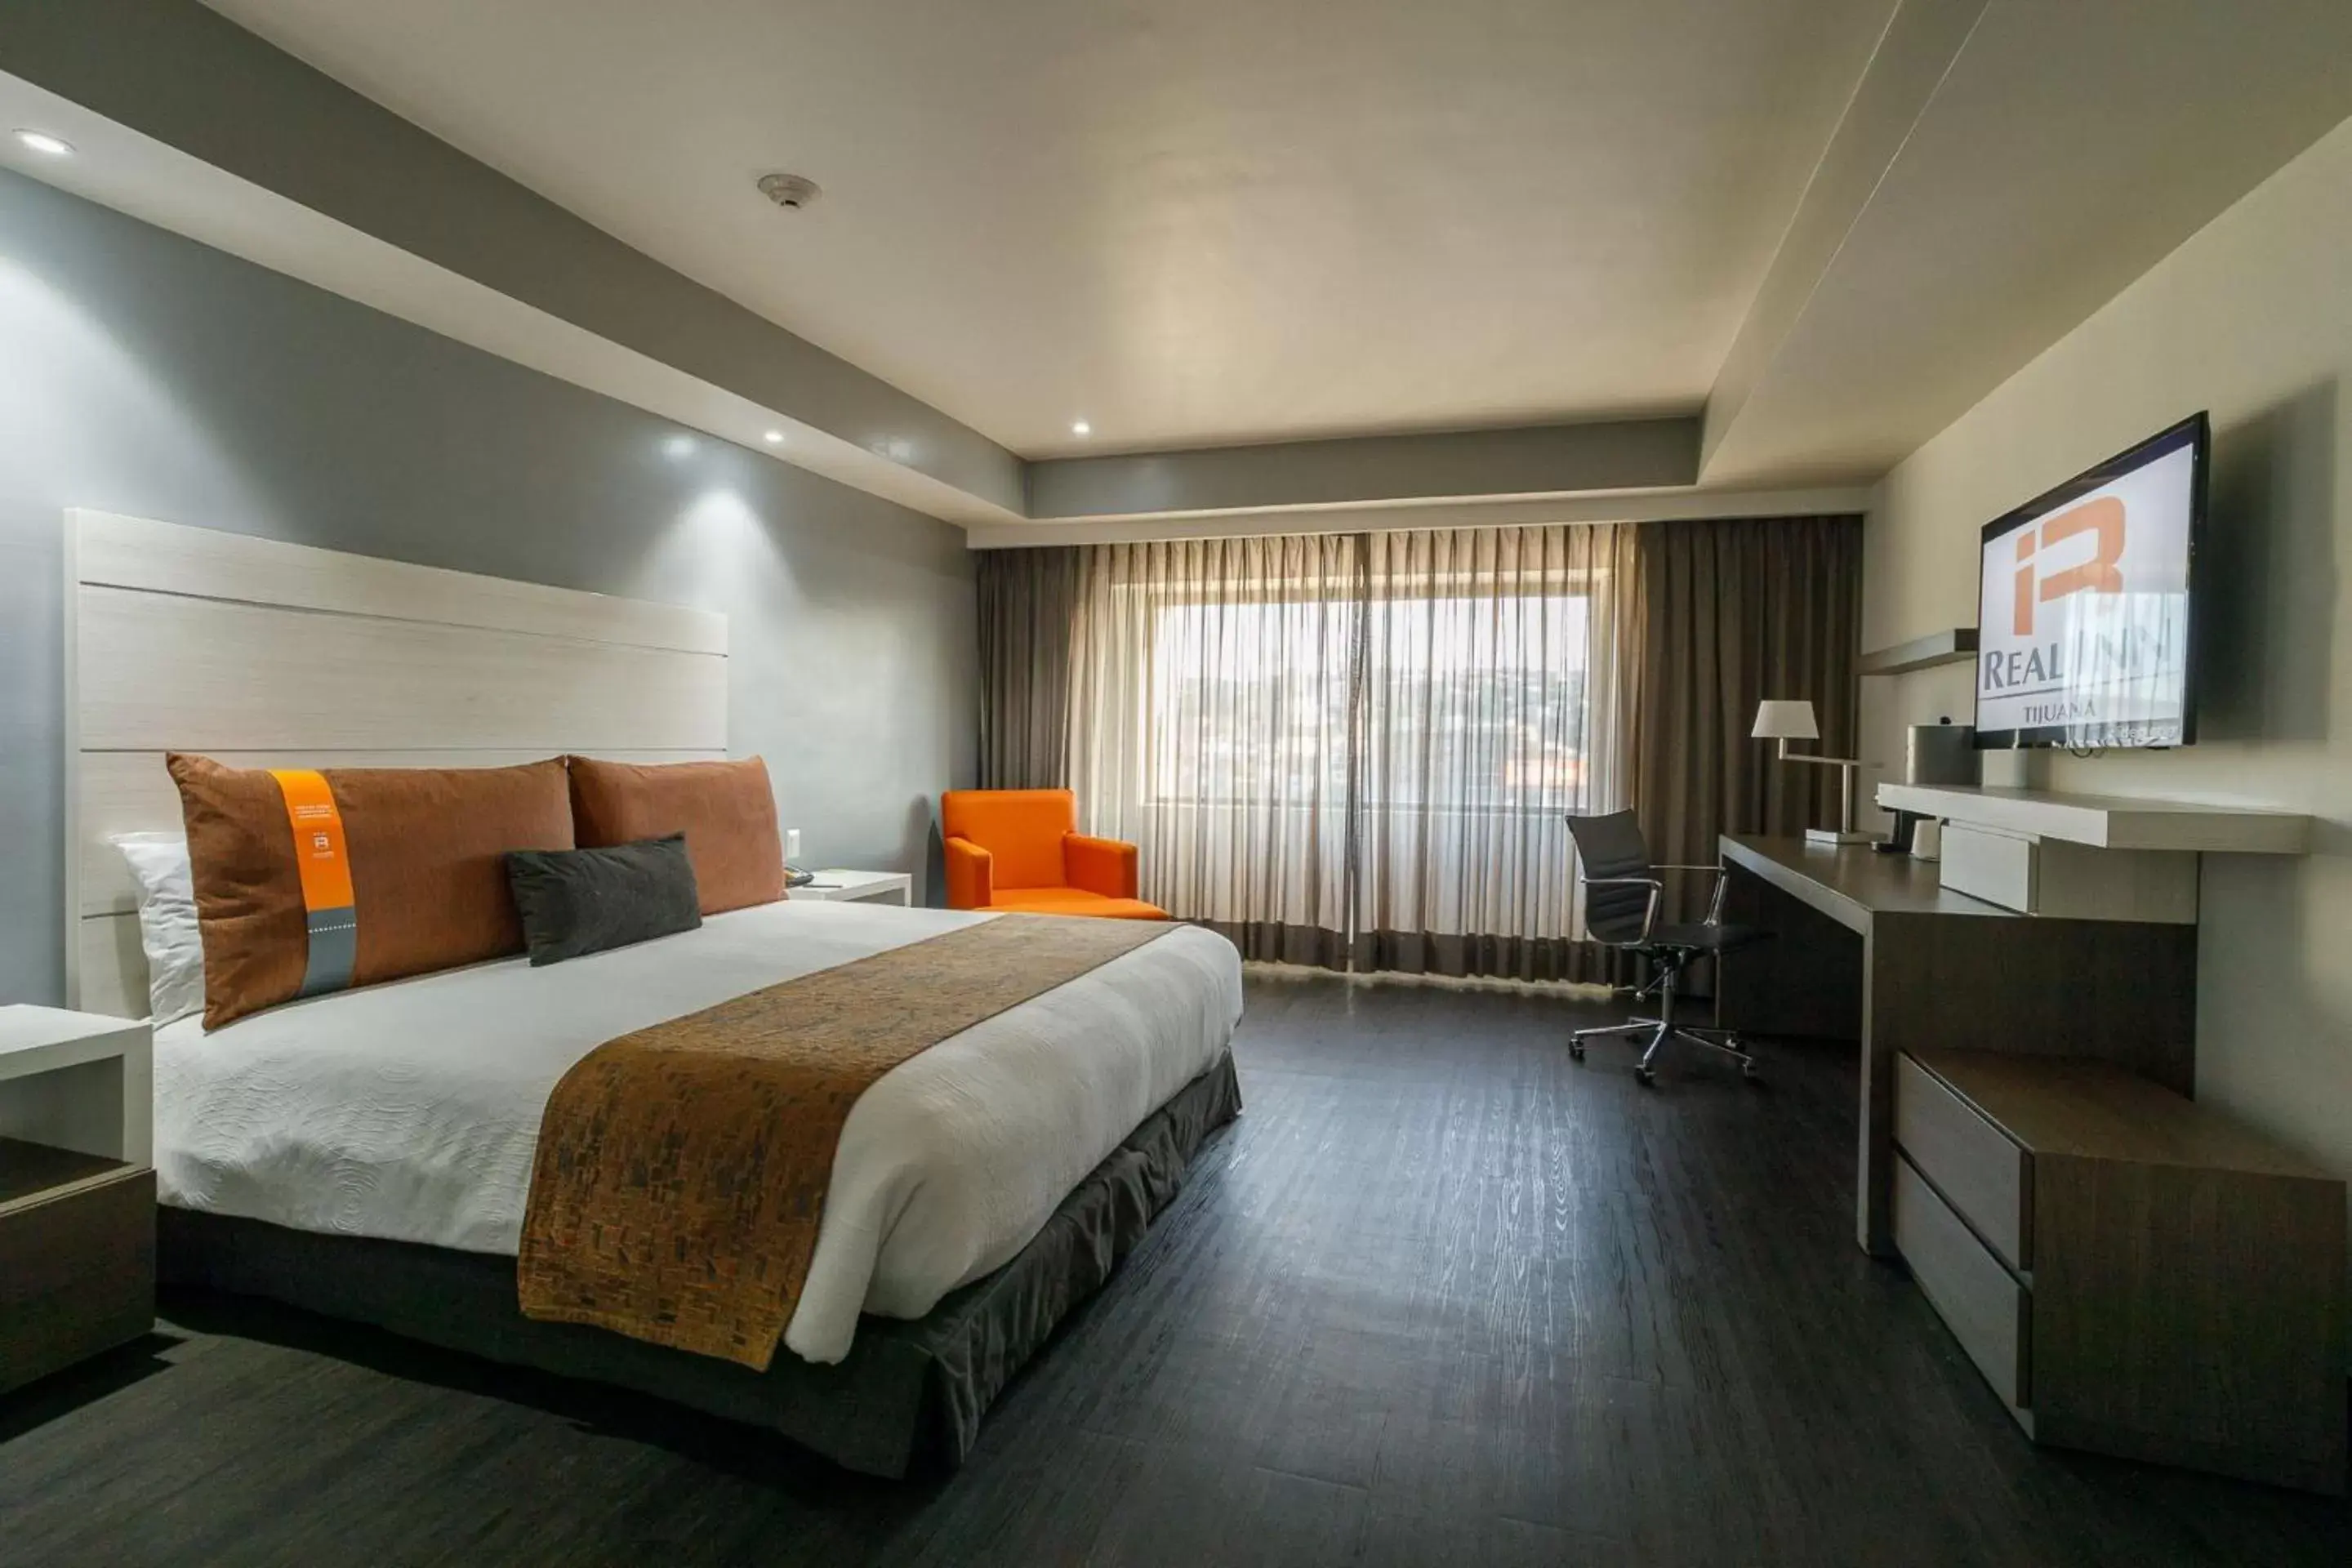 Bedroom in Real Inn Tijuana by Camino Real Hotels